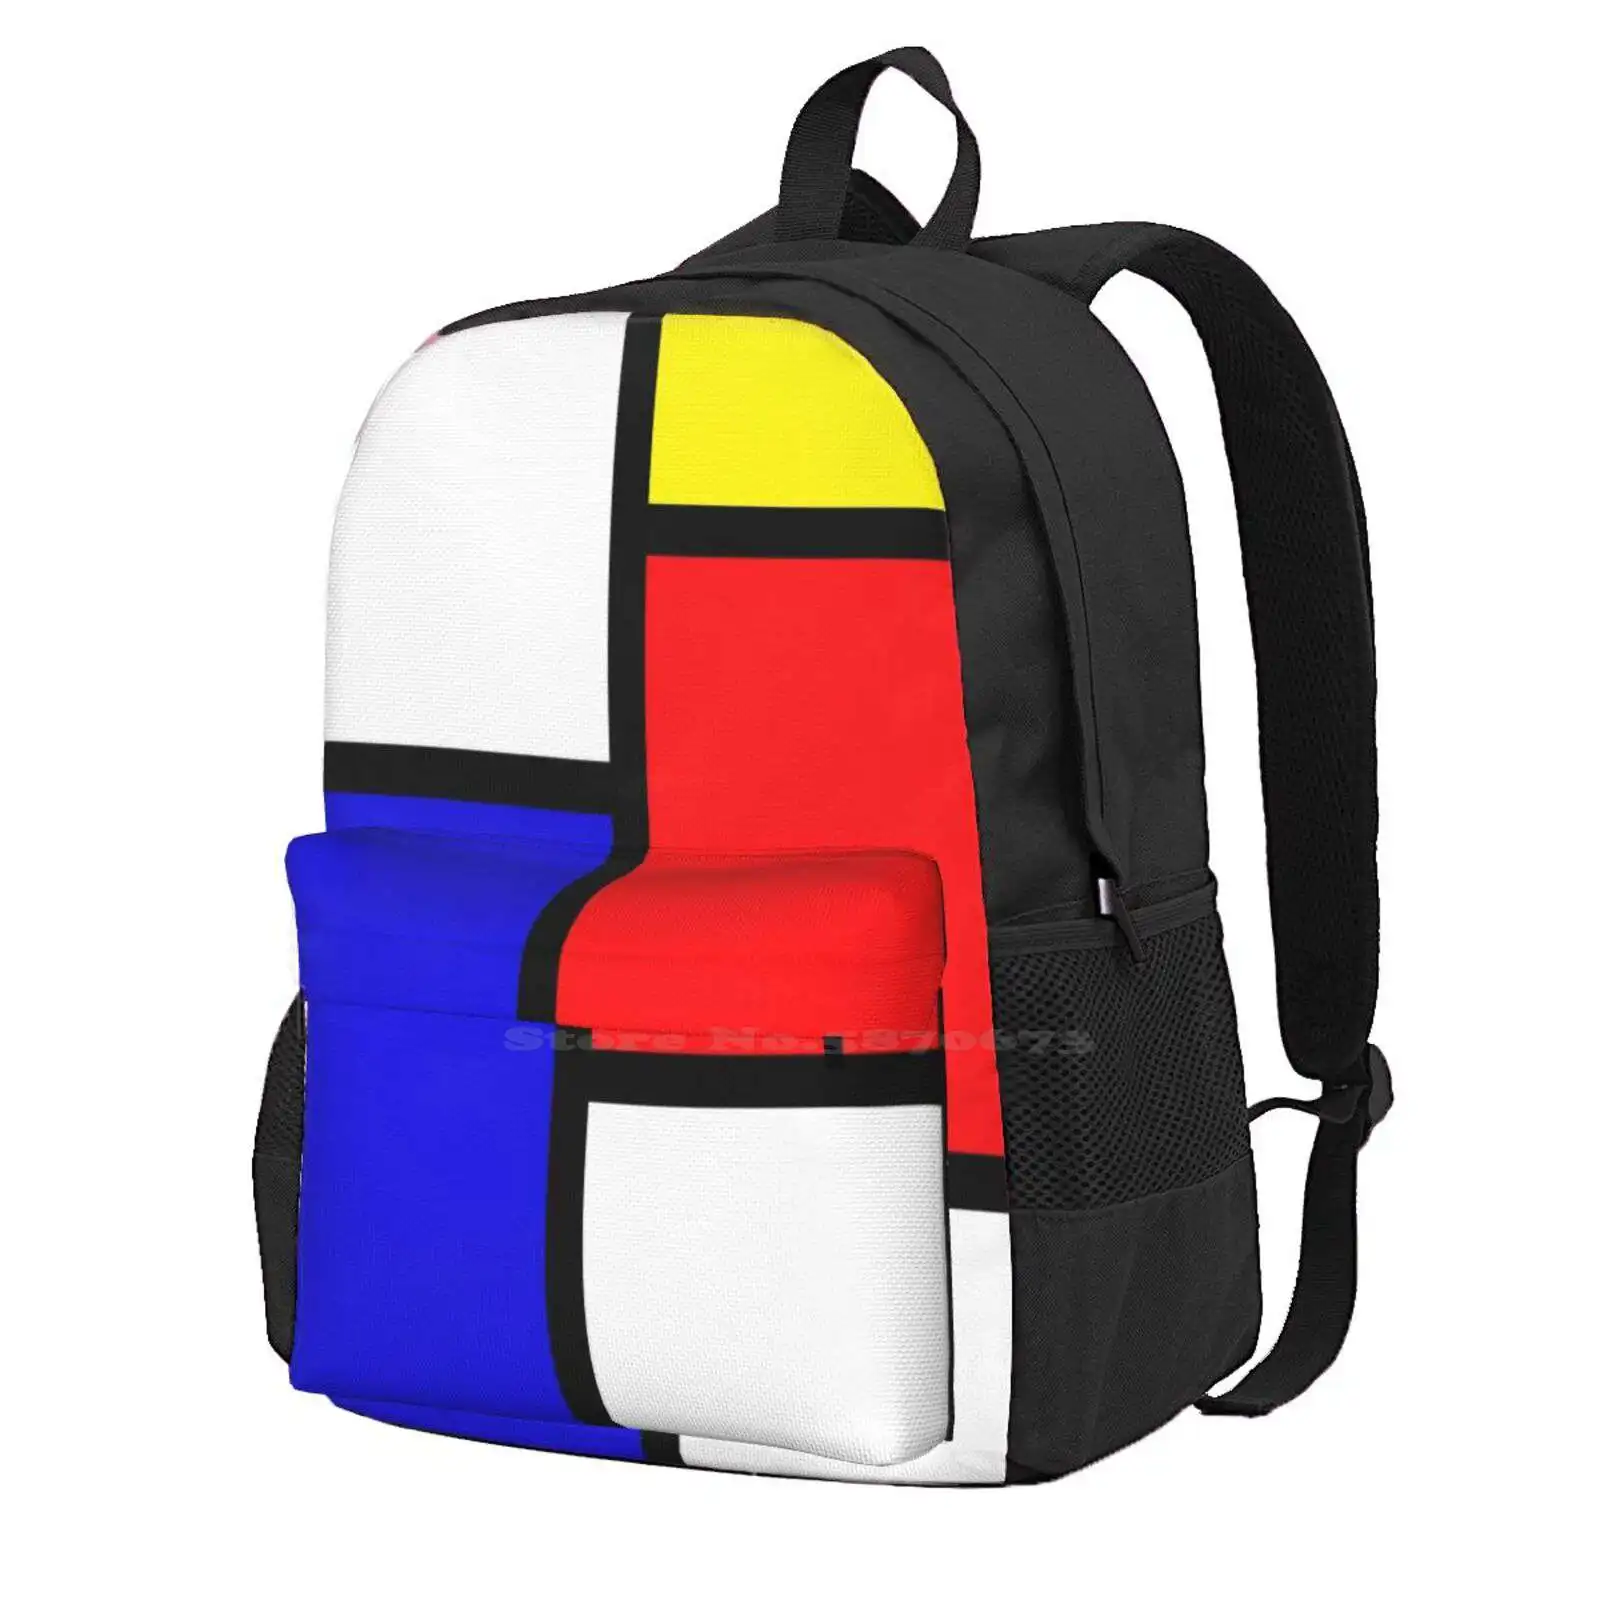 

Mondrian Hot Sale Backpack Fashion Bags Mondrian Artist Geometric Primary Colours Red Yellow Blue